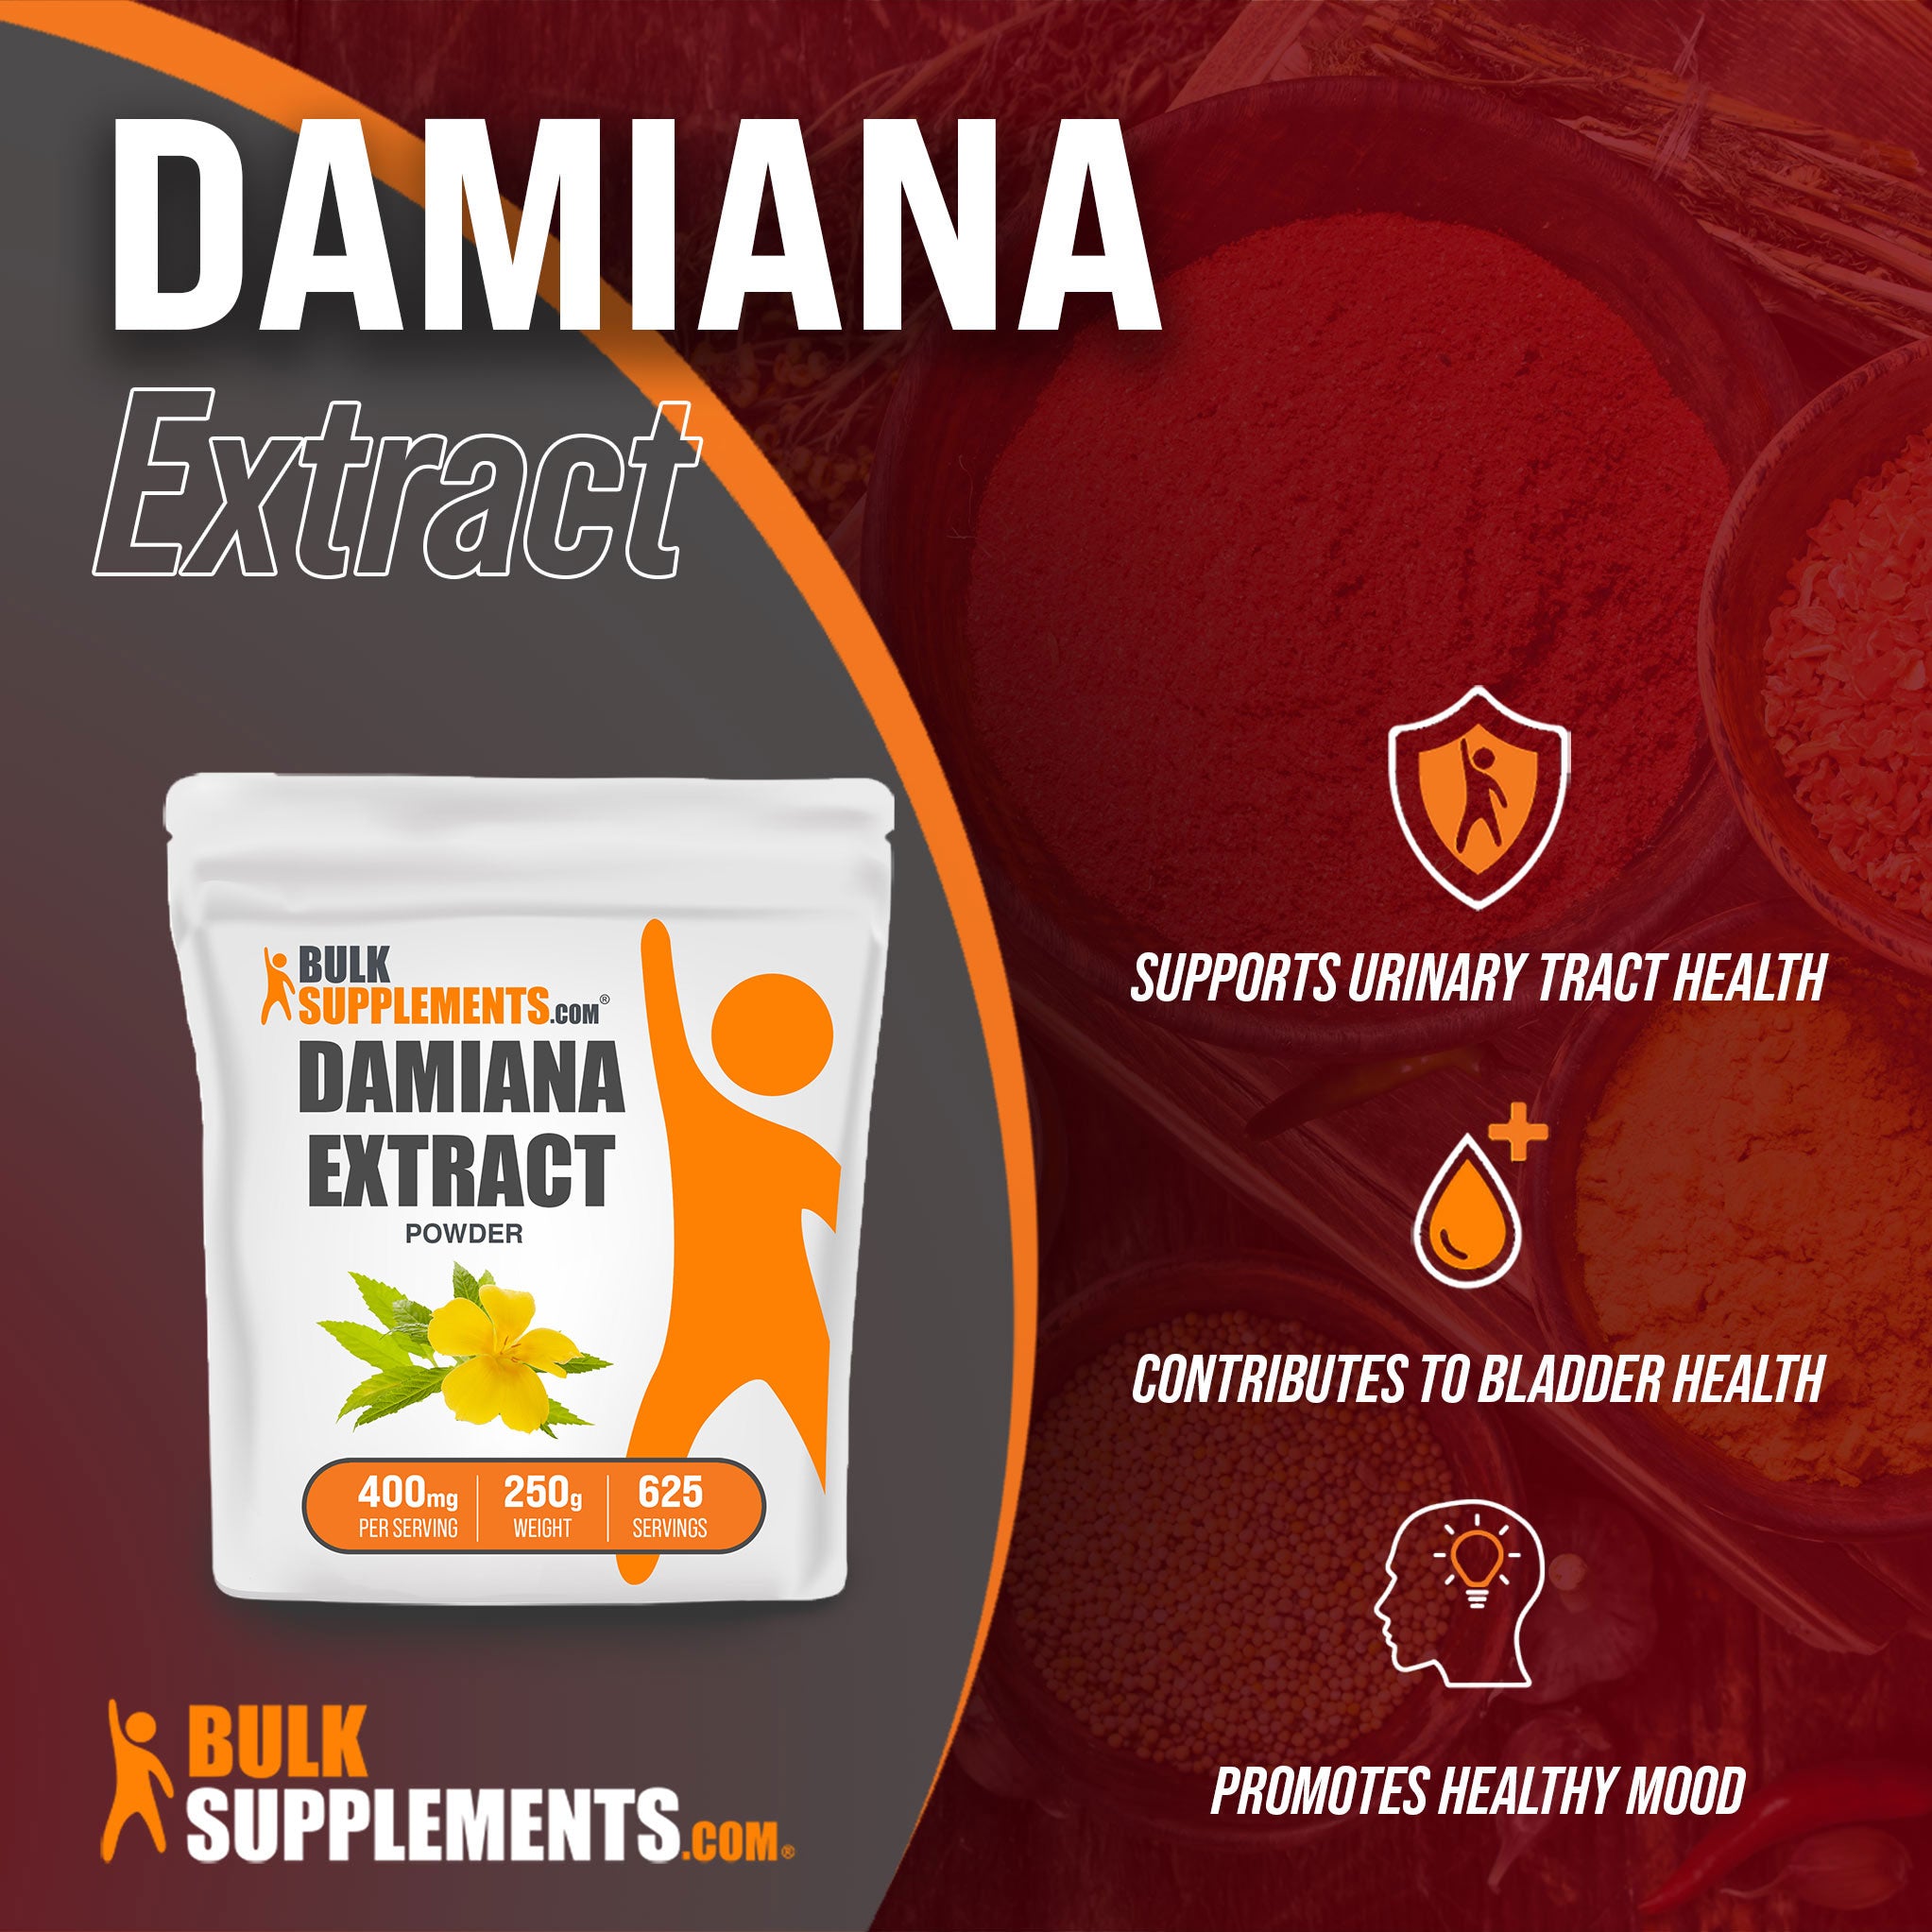 Benefits of Damiana Extract; supports urinary tract health, contributes to bladder health, promotes healthy mood